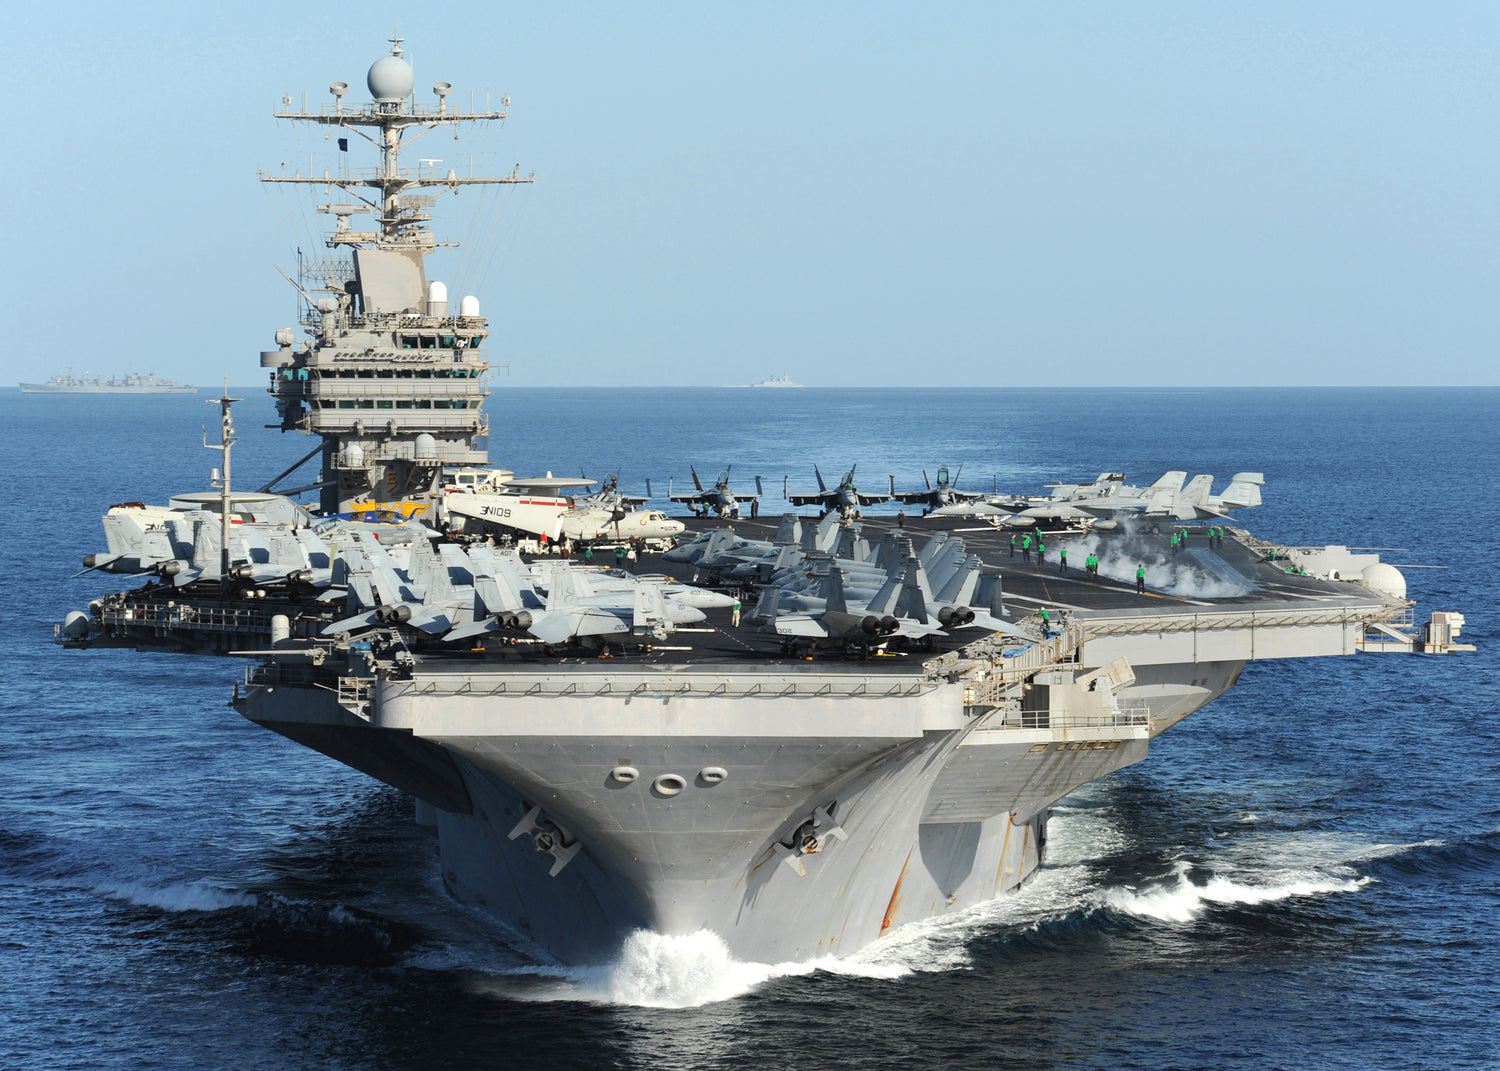 USS Abraham Lincoln (CVN 72) underway in the Arabian Sea in support of Operation Enduring Freedom